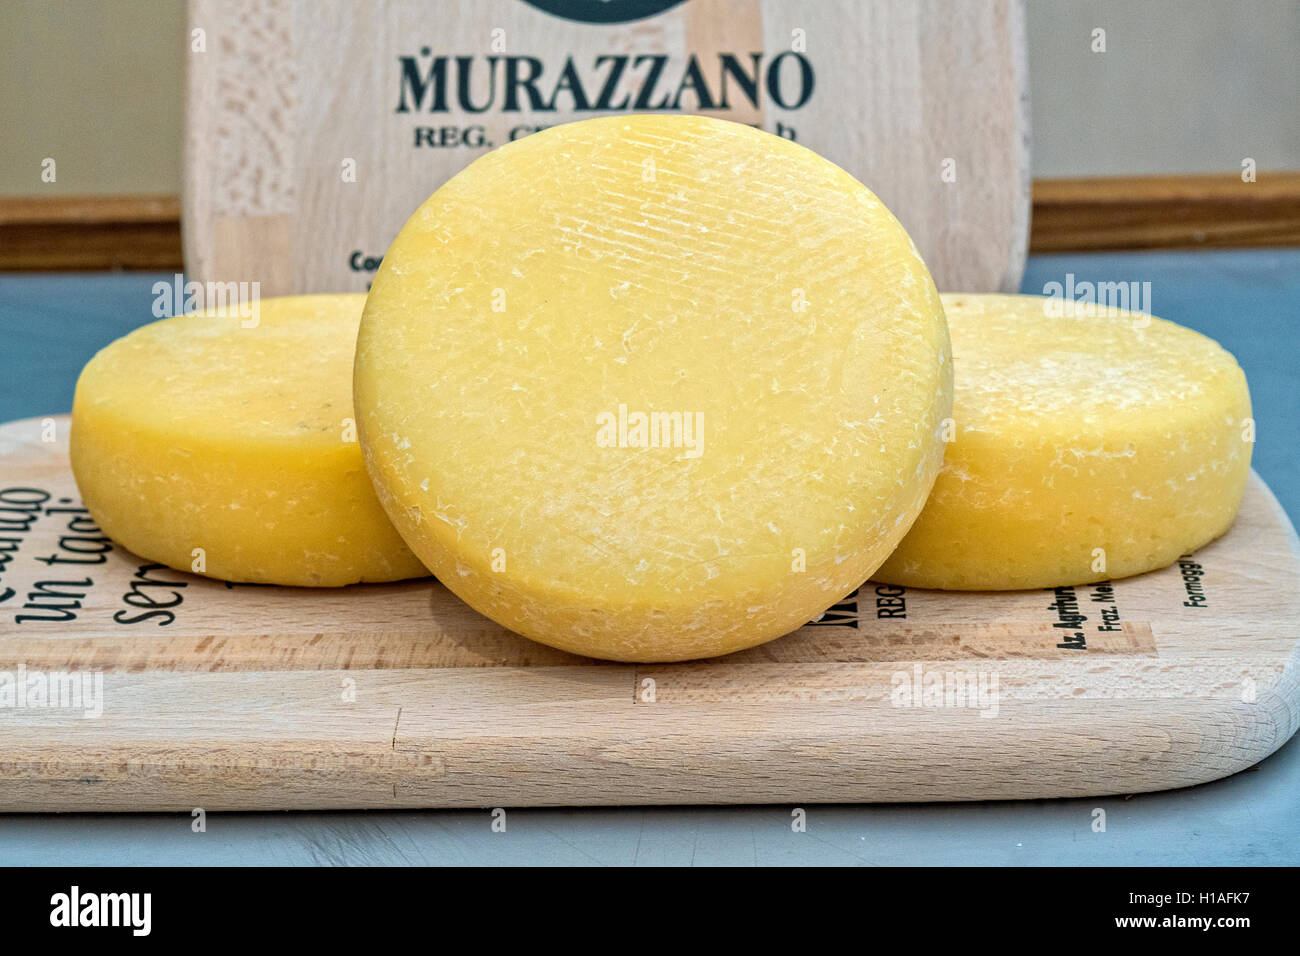 Italy Piedmont Turin 'Mother Earth -  Salone del Gusto 2016 ' - The theme of this year's edition is LOVING THE EARTH - Piedmont Cheese Murazzano Dop Stock Photo